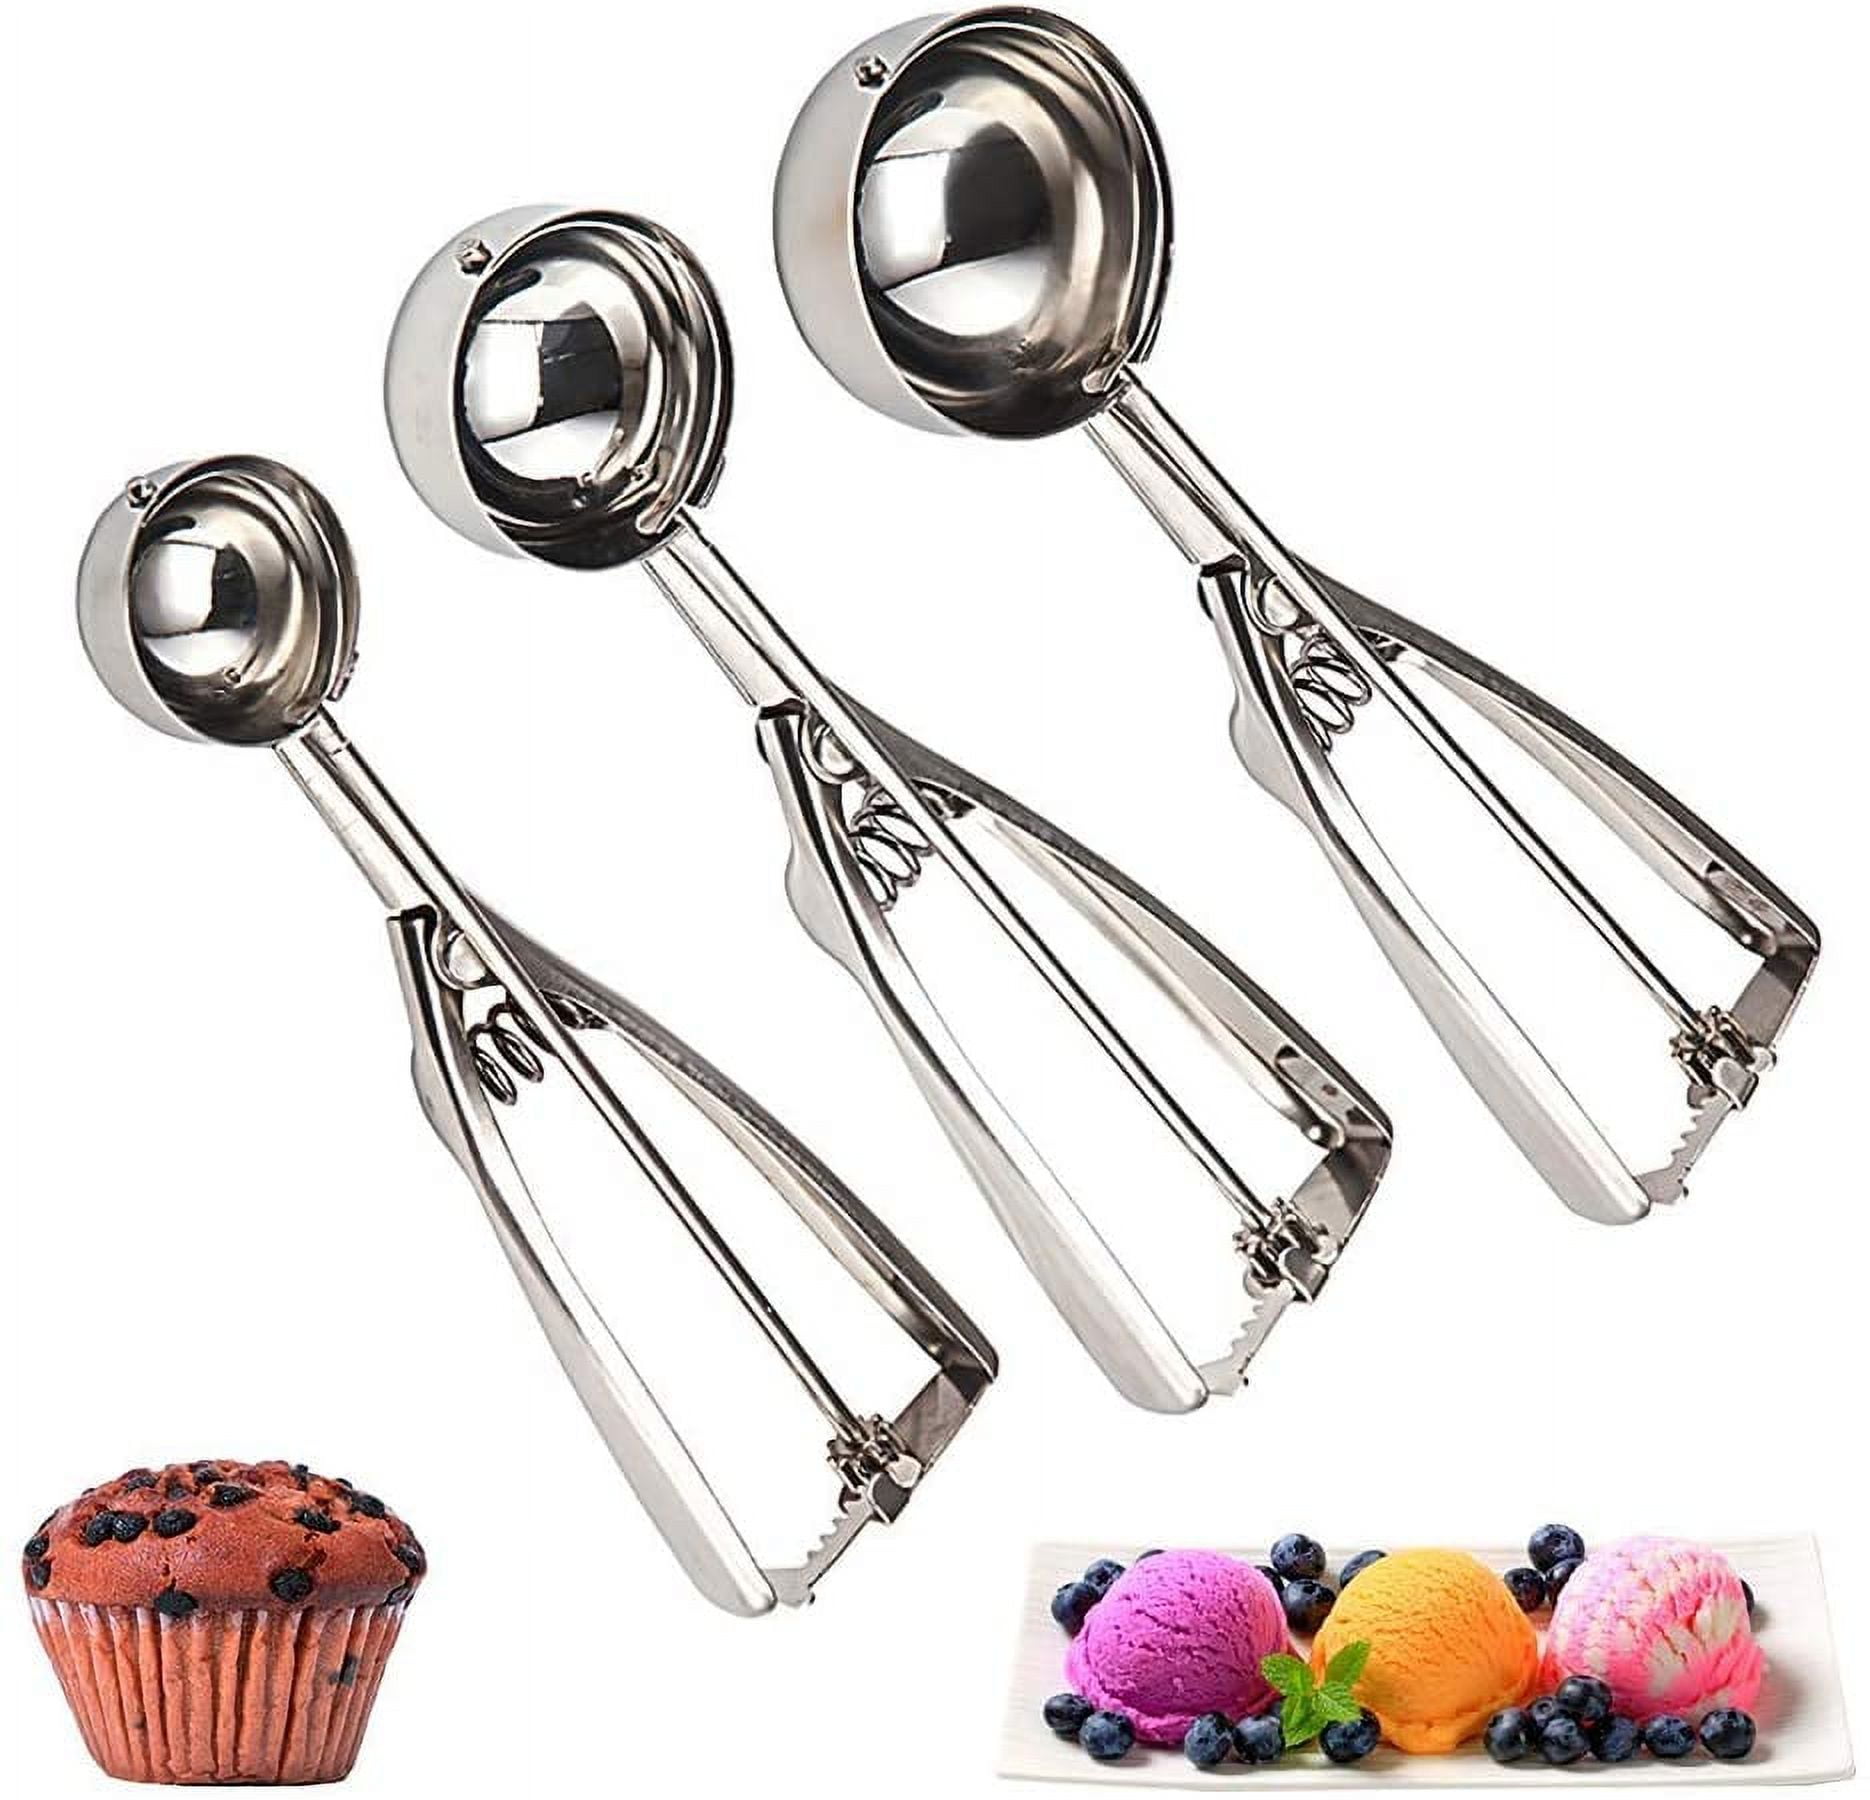 Windfall Stainless Steel Ice Cream Scooper with Trigger, Small, Medium and Large Cookie Scoops for Baking, Easy to Clean, Highly Durable, Ergonomic